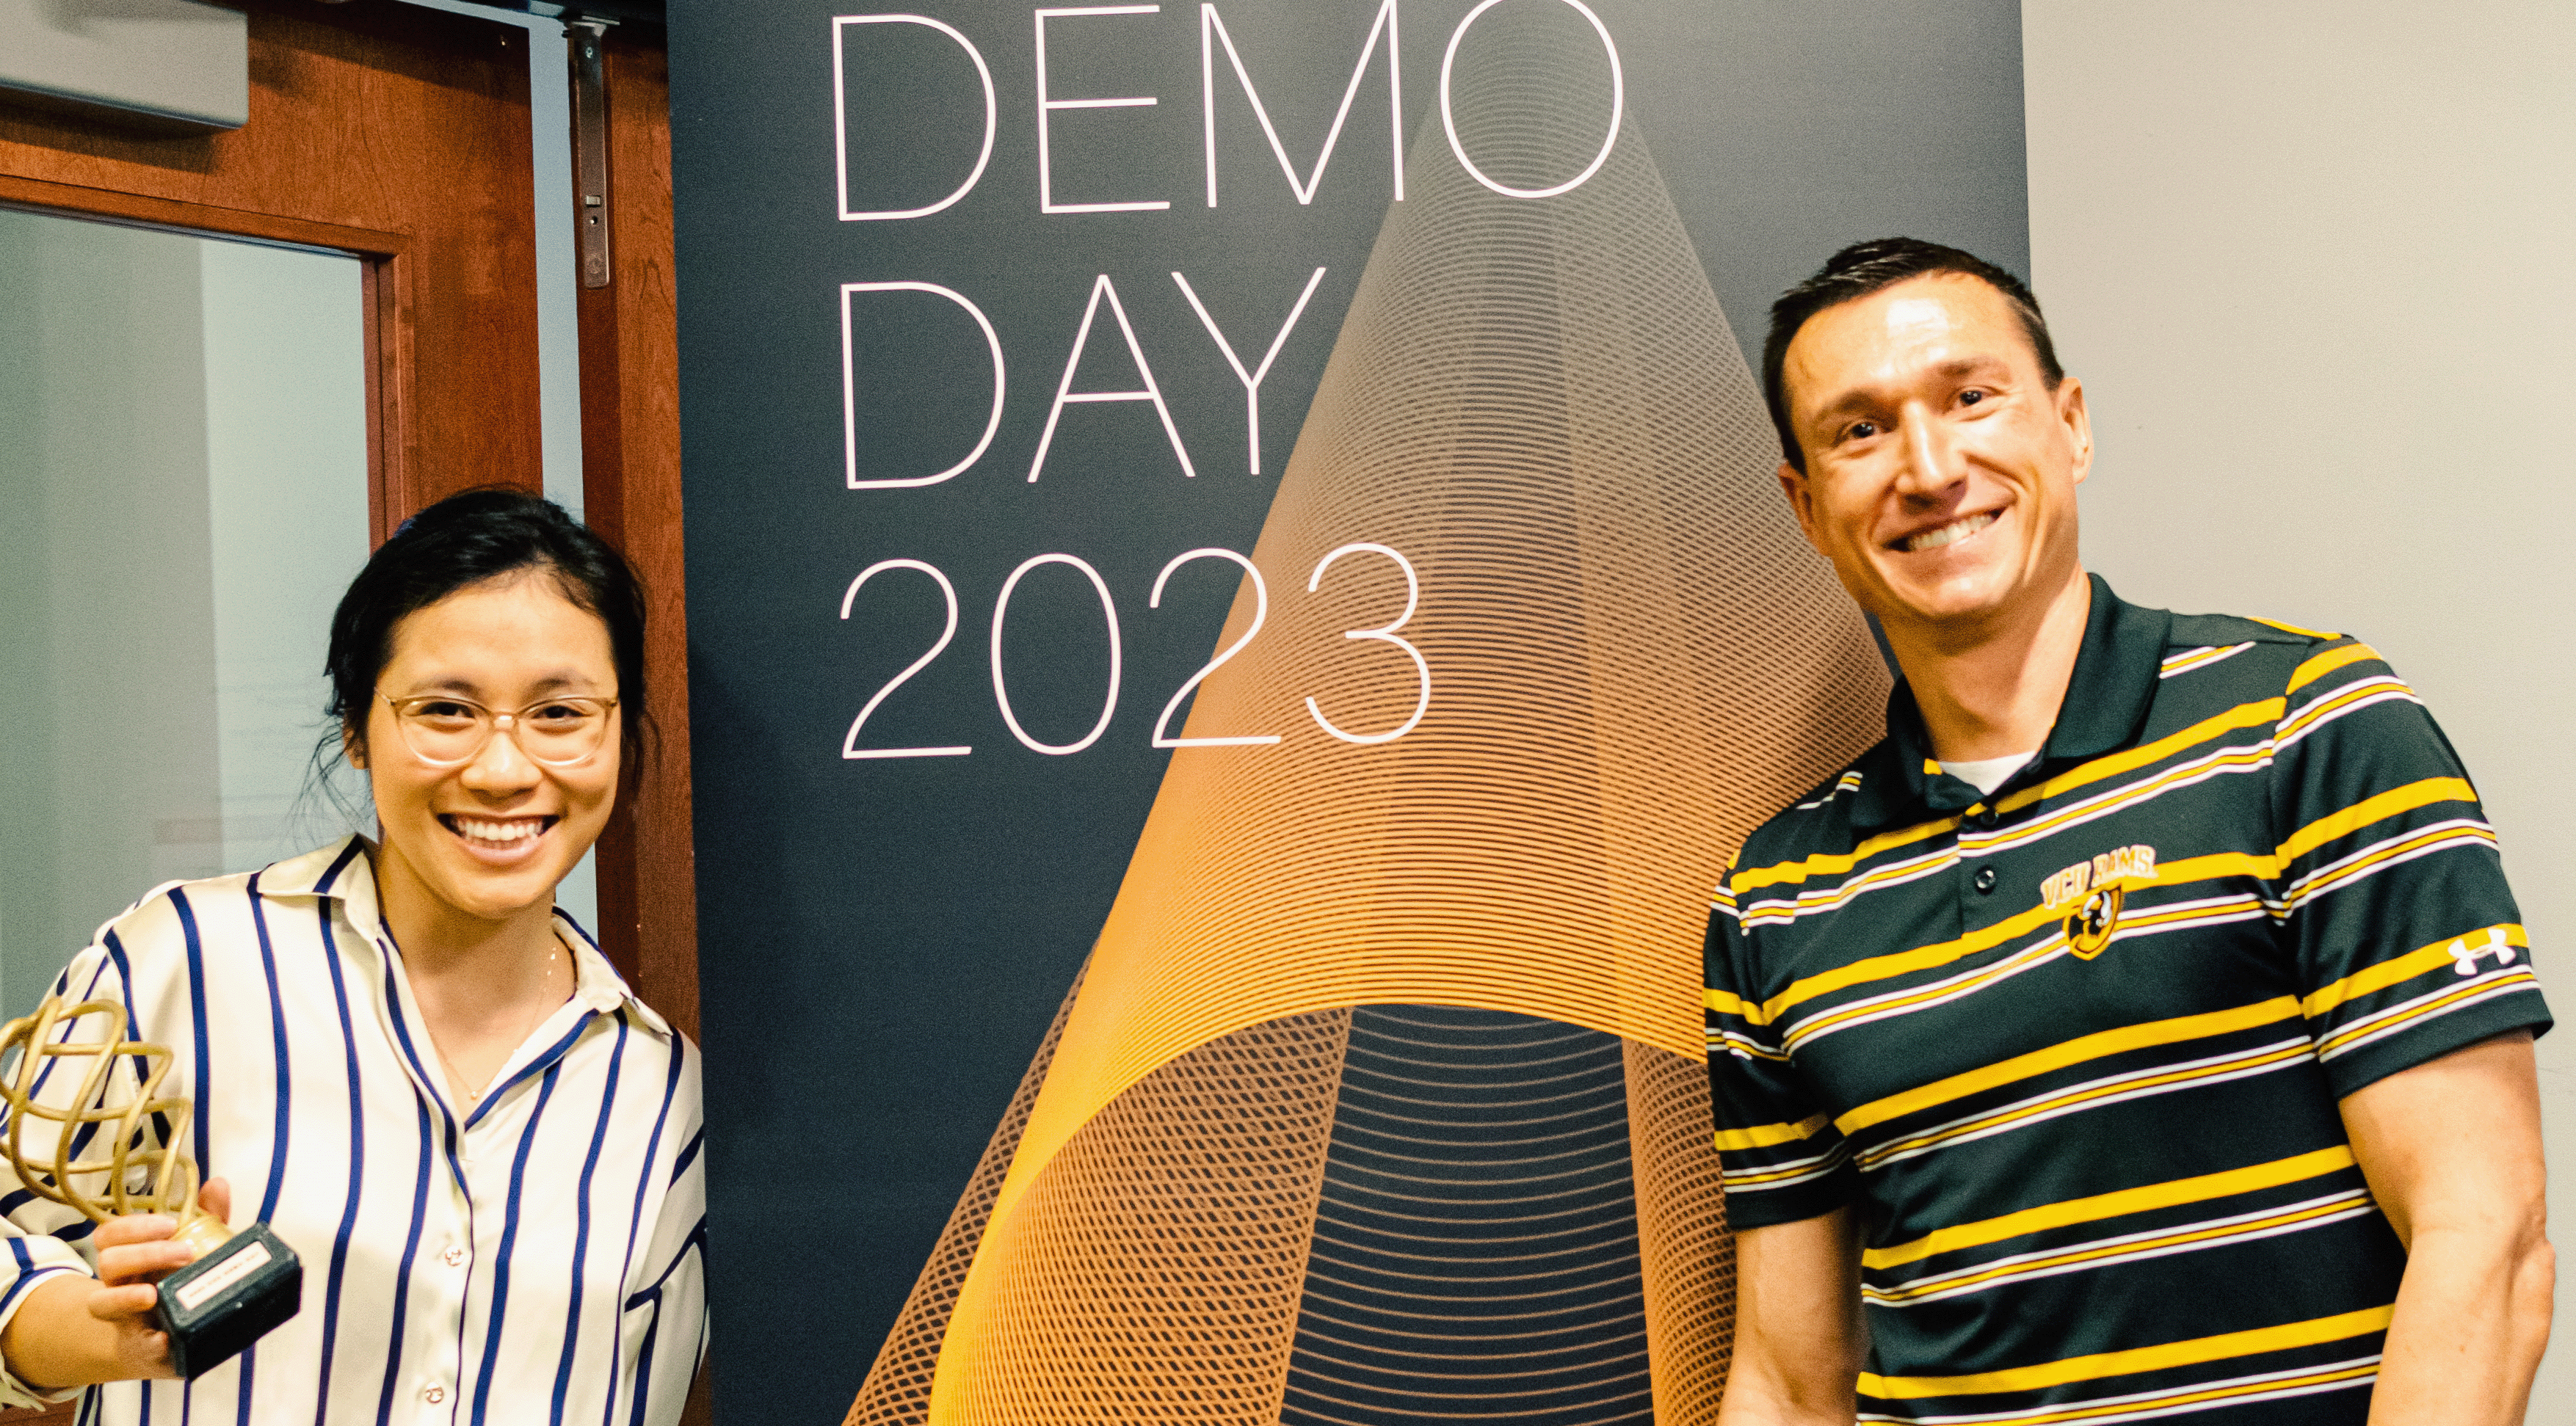 Garret Westlake, Ph.D., with an awardee from Demo Day 2023, in front of a banner with the the text, 